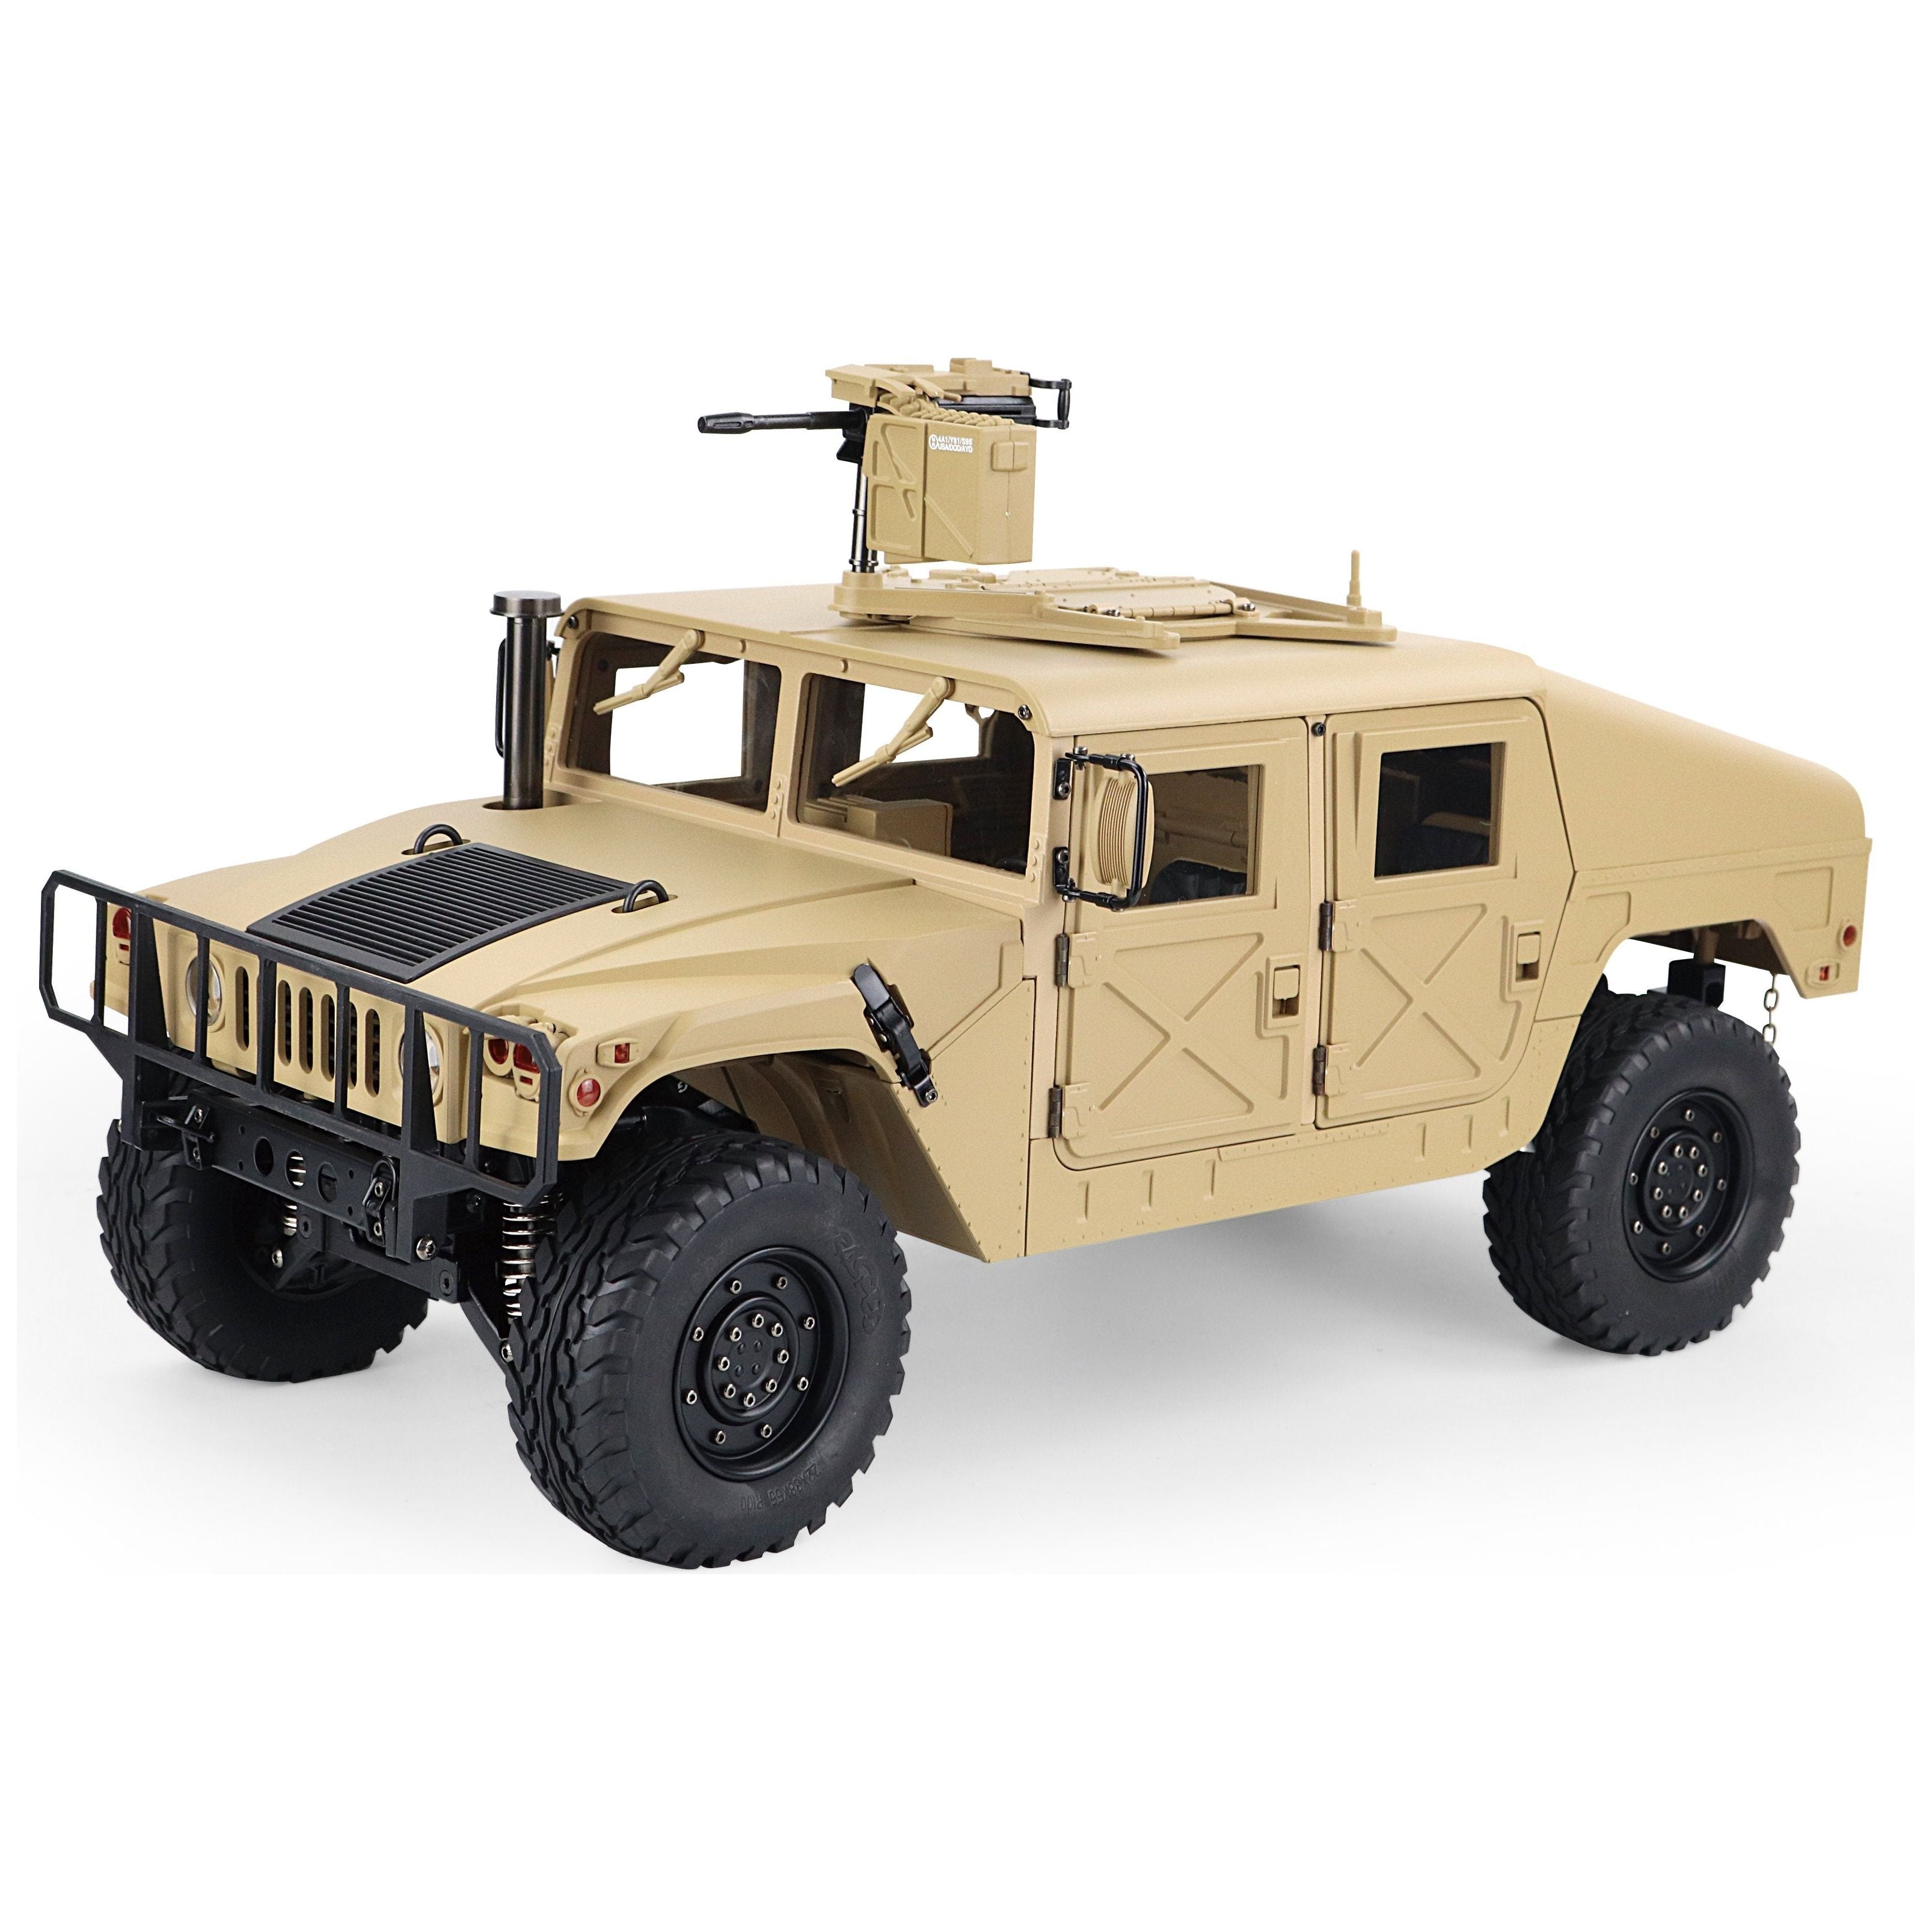 1/10th Scale HG-P408 4x4 Military Humvee Upgraded ARTR w/ LEDs and Sounds